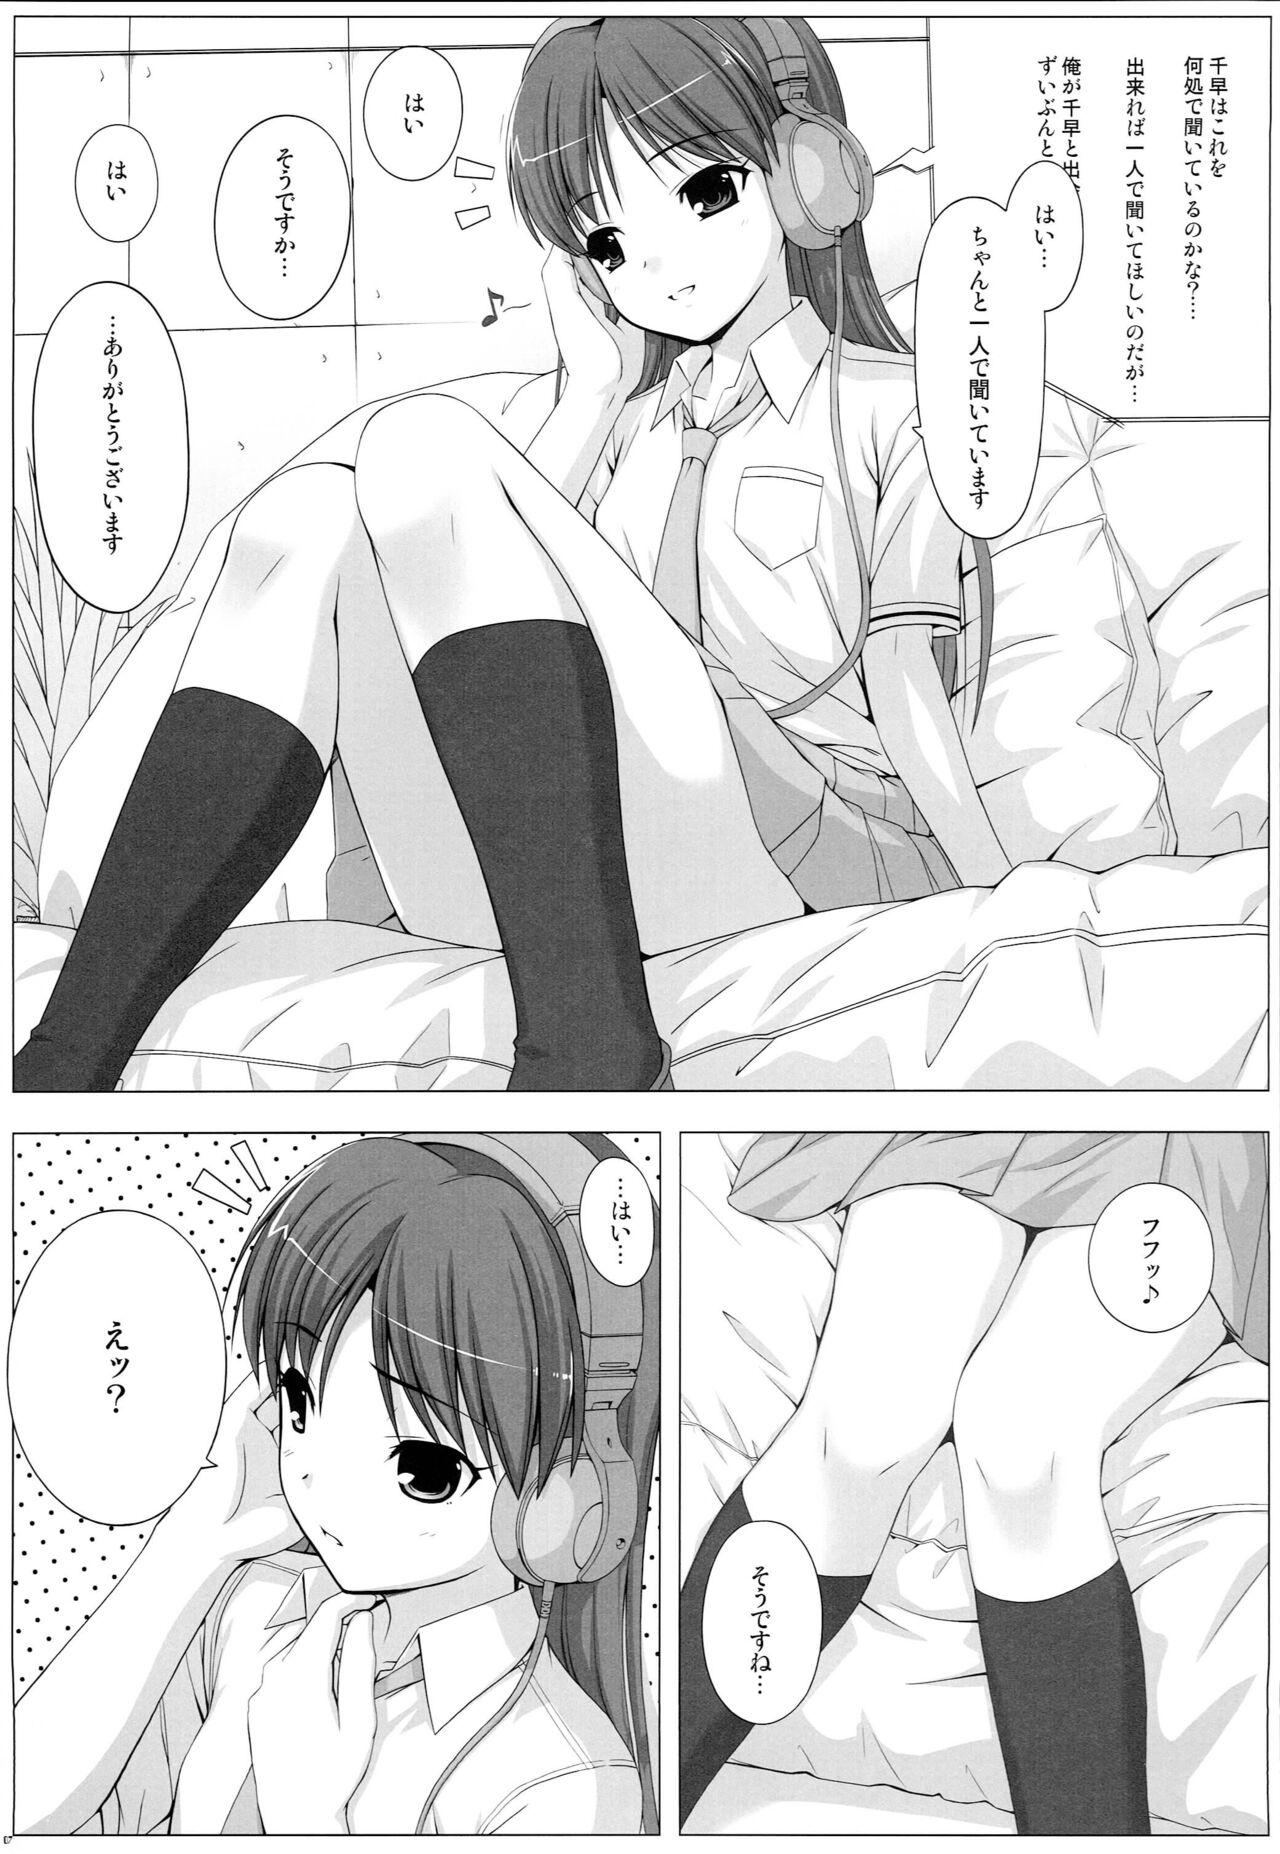 Pounding BAD COMMUNICATION? 09 - The idolmaster Parties - Page 6